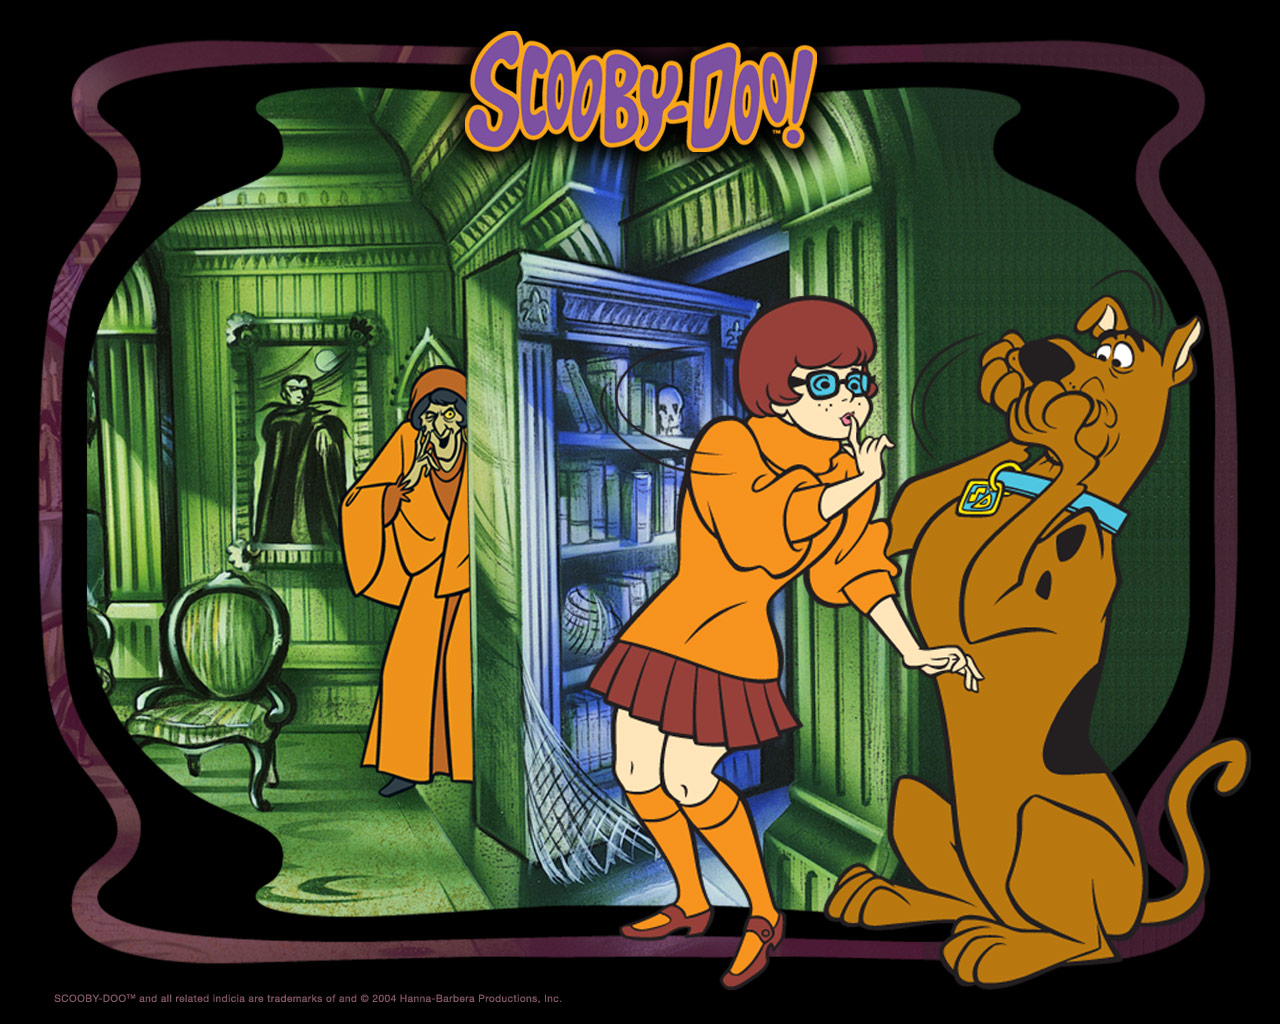 Scoobby Doo Vs Scary Dog Picarena Image Match Pictures